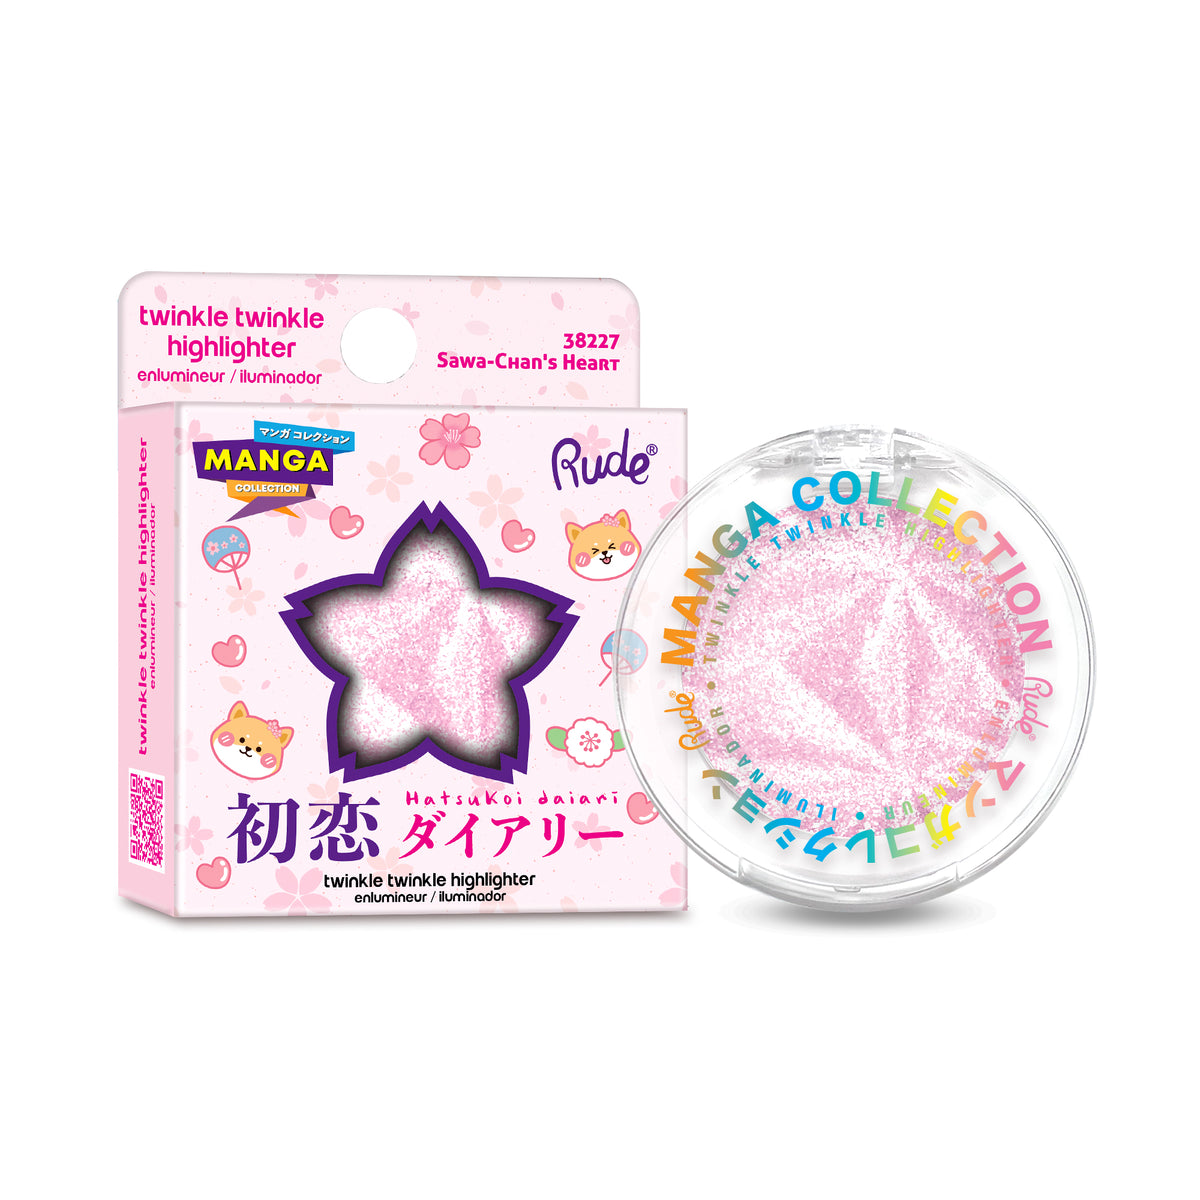 Manga Collection Twinkle Twinkle Highlighter - Sawa-Chan's Heart